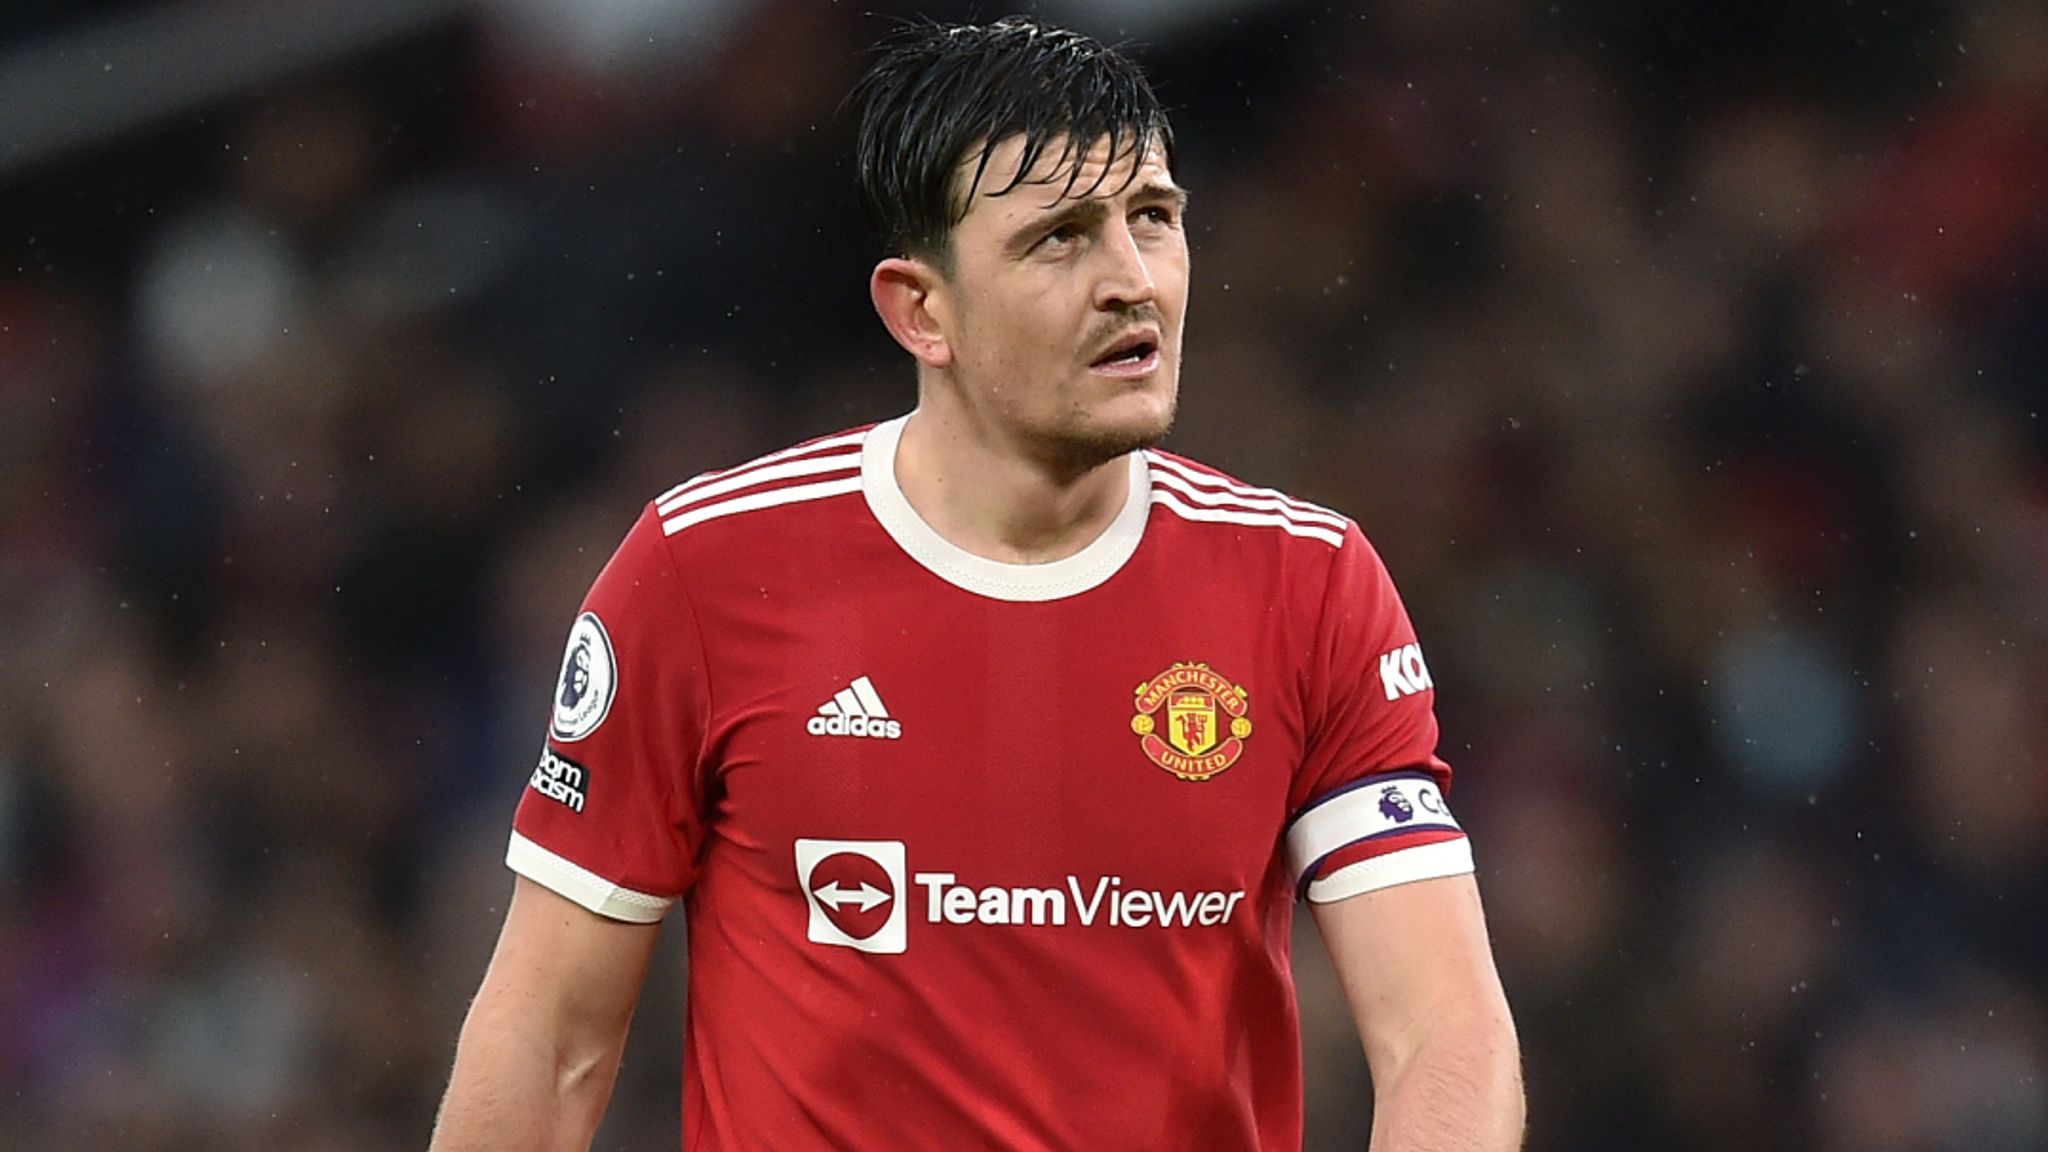 Manchester United captain Harry Maguire has had a season to forget